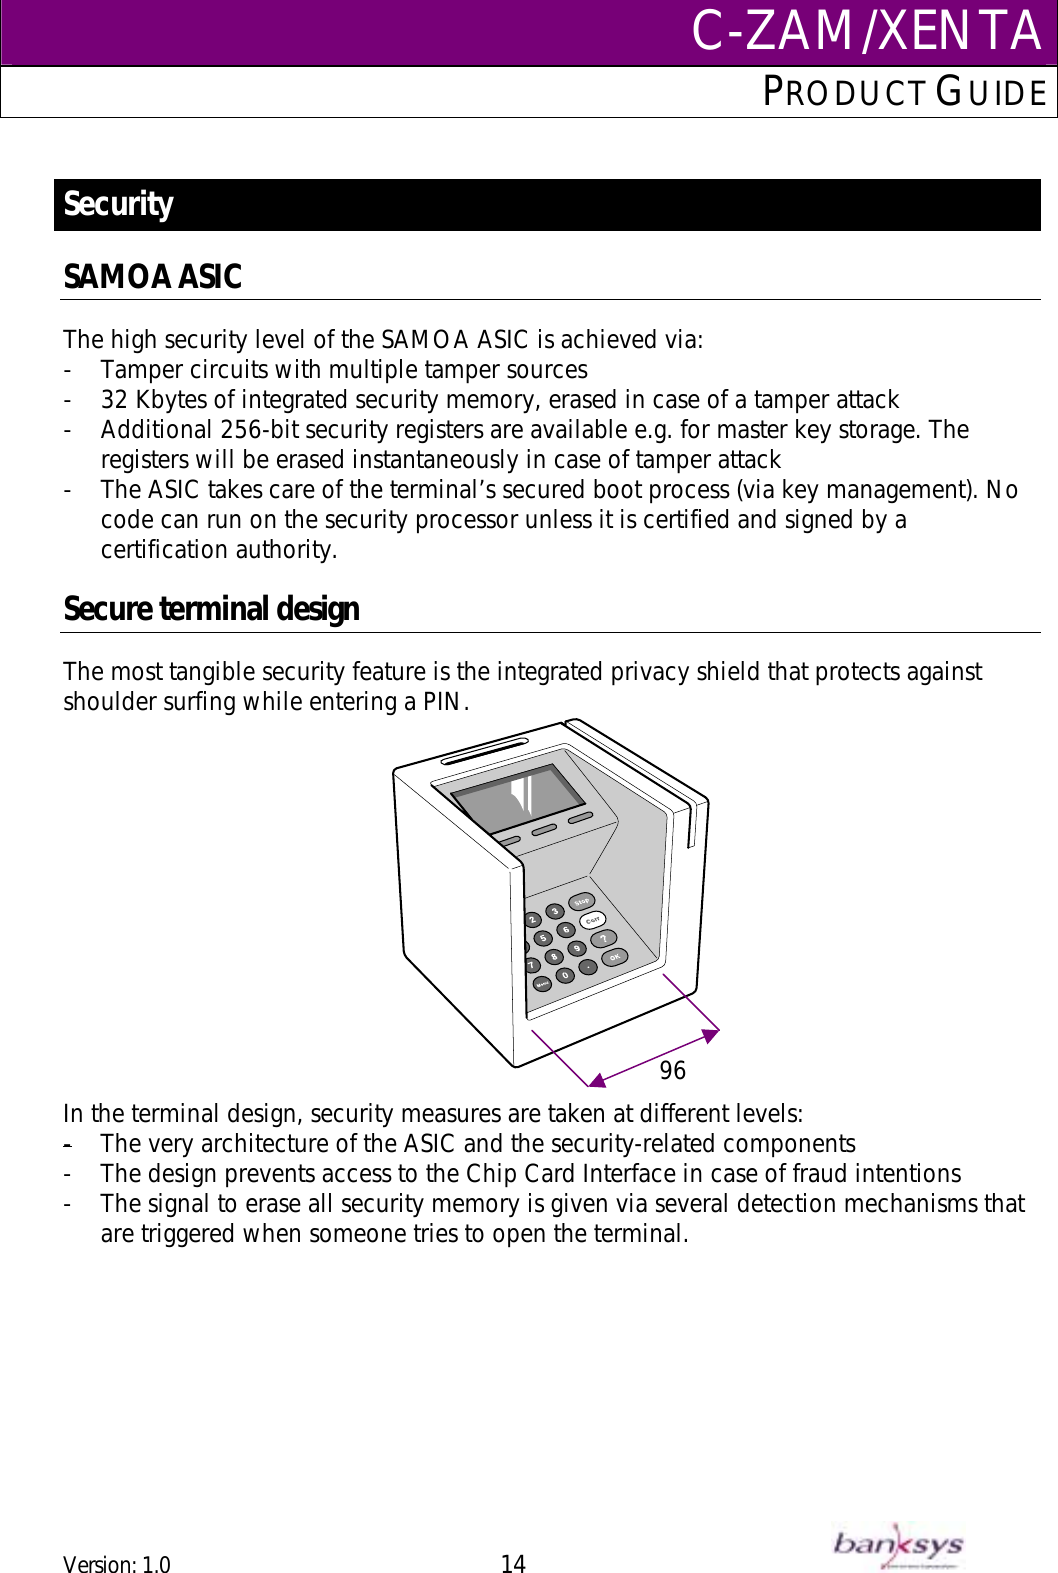 C-ZAM/XENTAPRODUCT GUIDE   Security  SAMOA ASIC The high security level of the SAMOA ASIC is achieved via: -  Tamper circuits with multiple tamper sources -  32 Kbytes of integrated security memory, erased in case of a tamper attack  -  Additional 256-bit security registers are available e.g. for master key storage. The registers will be erased instantaneously in case of tamper attack -  The ASIC takes care of the terminal’s secured boot process (via key management). No code can run on the security processor unless it is certified and signed by a certification authority.   Secure terminal design The most tangible security feature is the integrated privacy shield that protects against shoulder surfing while entering a PIN.  96   In the terminal design, security measures are taken at different levels: -  The very architecture of the ASIC and the security-related components-  The design prevents access to the Chip Card Interface in case of fraud intentions  -  The signal to erase all security memory is given via several detection mechanisms that are triggered when someone tries to open the terminal.   Version: 1.0 14      